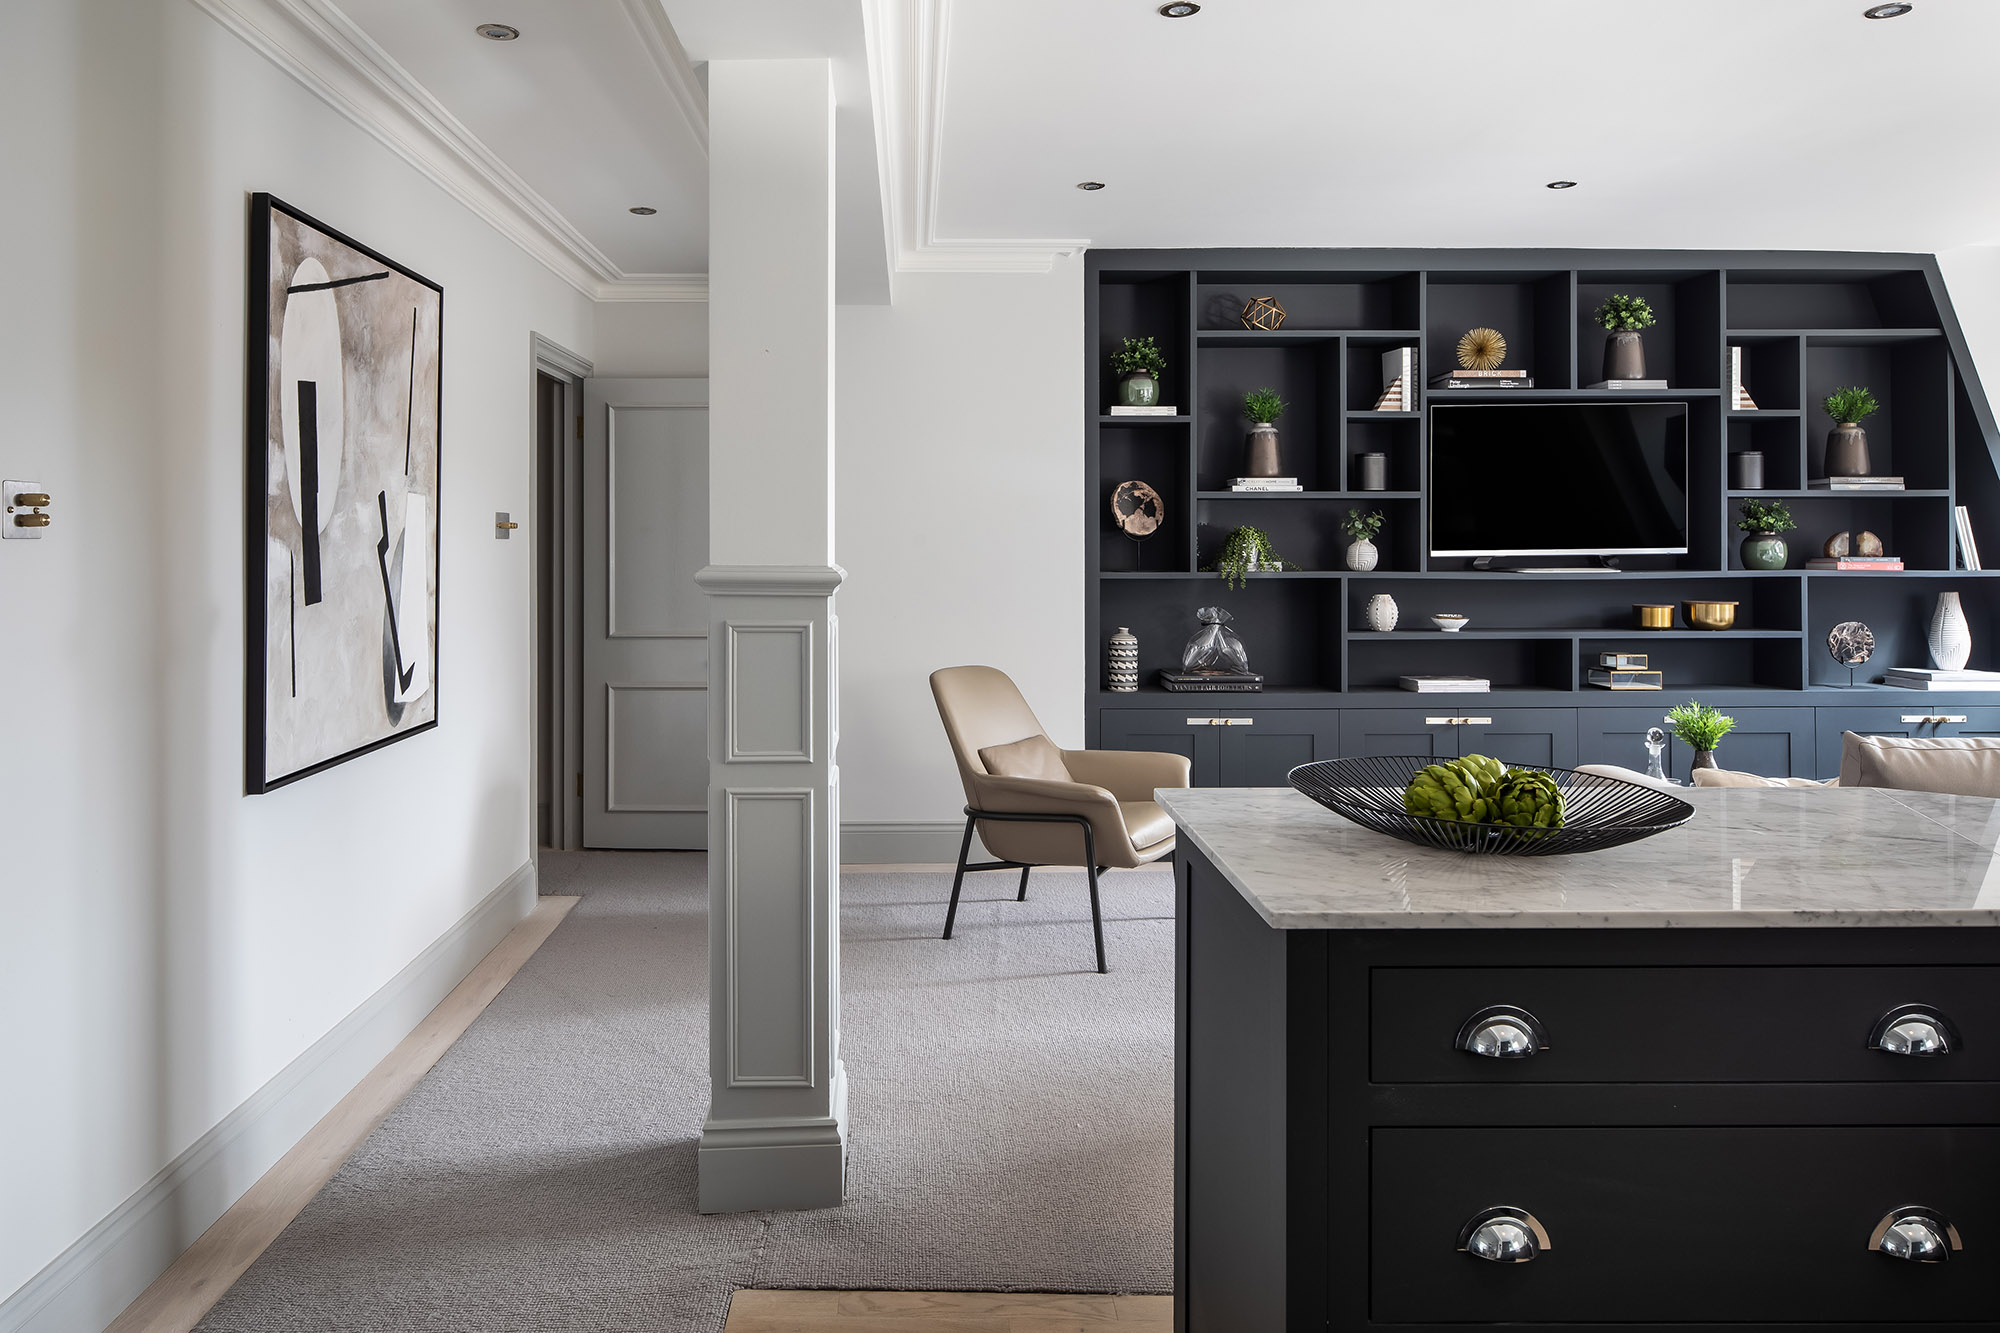 Win a luxury Kensington apartment for £10